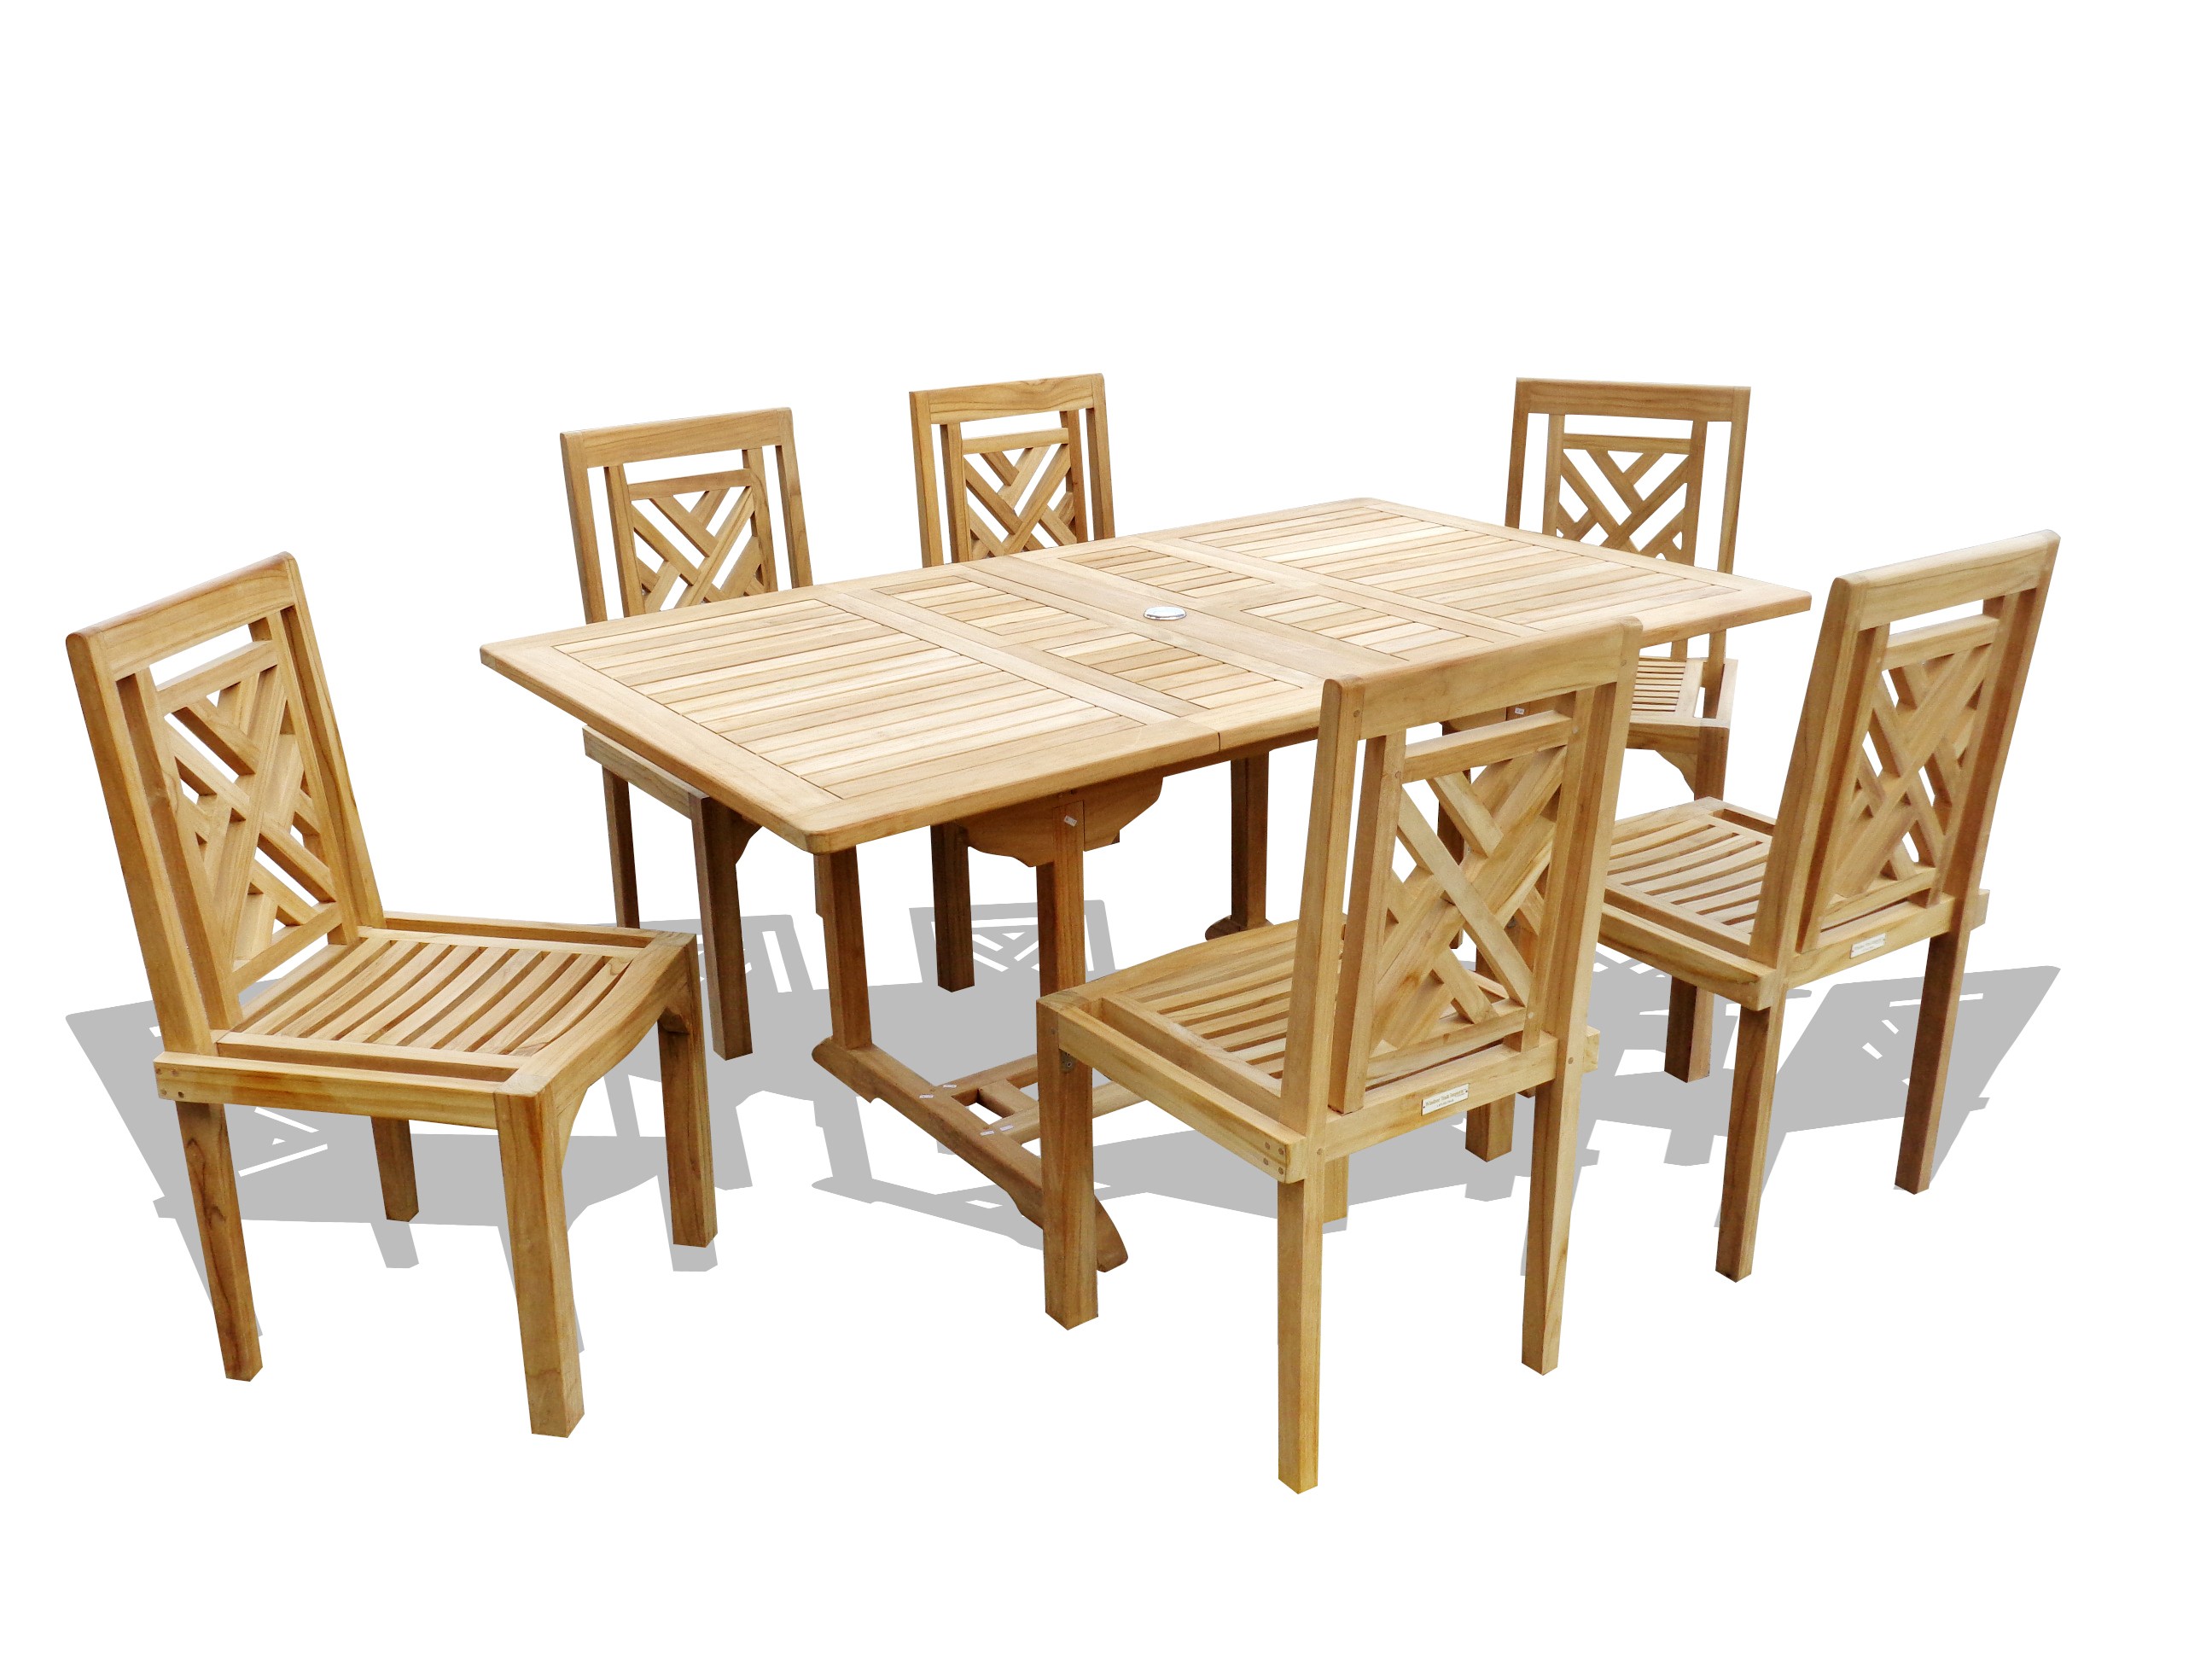 Buckingham 66" x 39" Double Leaf Rectangular Extension Teak Table W/6 Chippendale Stacking Chairs...can seat 8